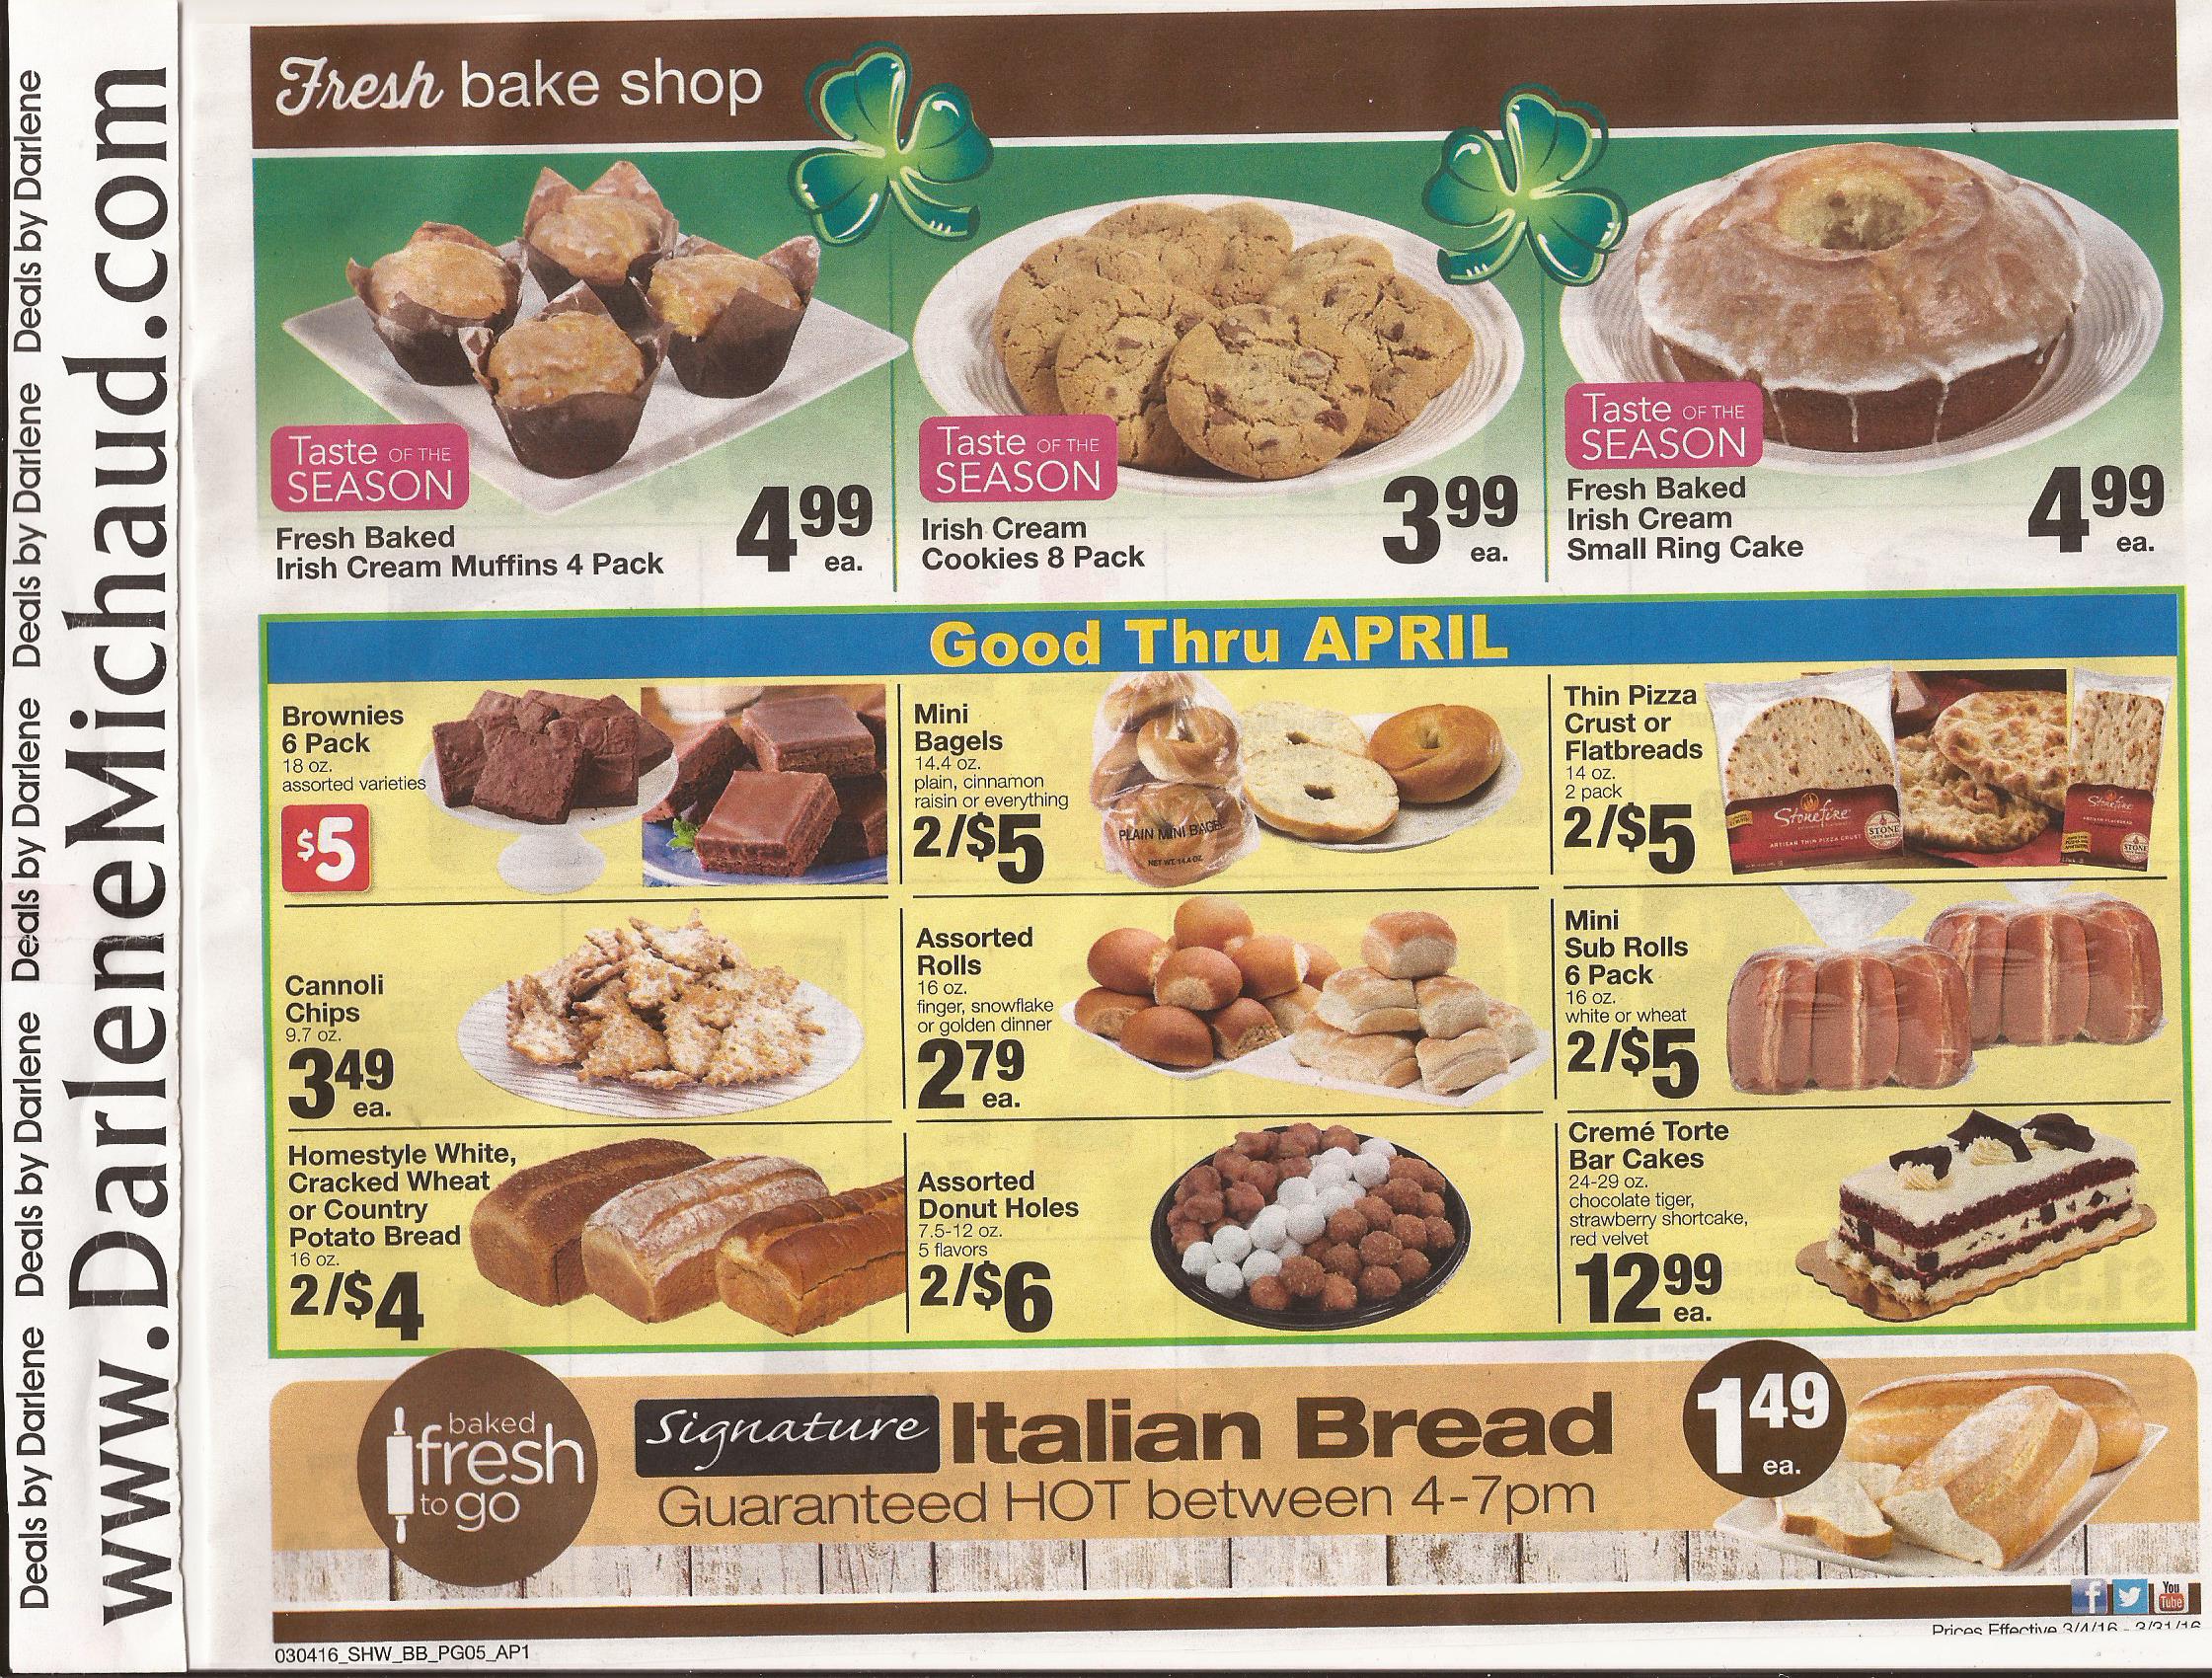 shaws-big-book-savings-march-4-march-31-page-05